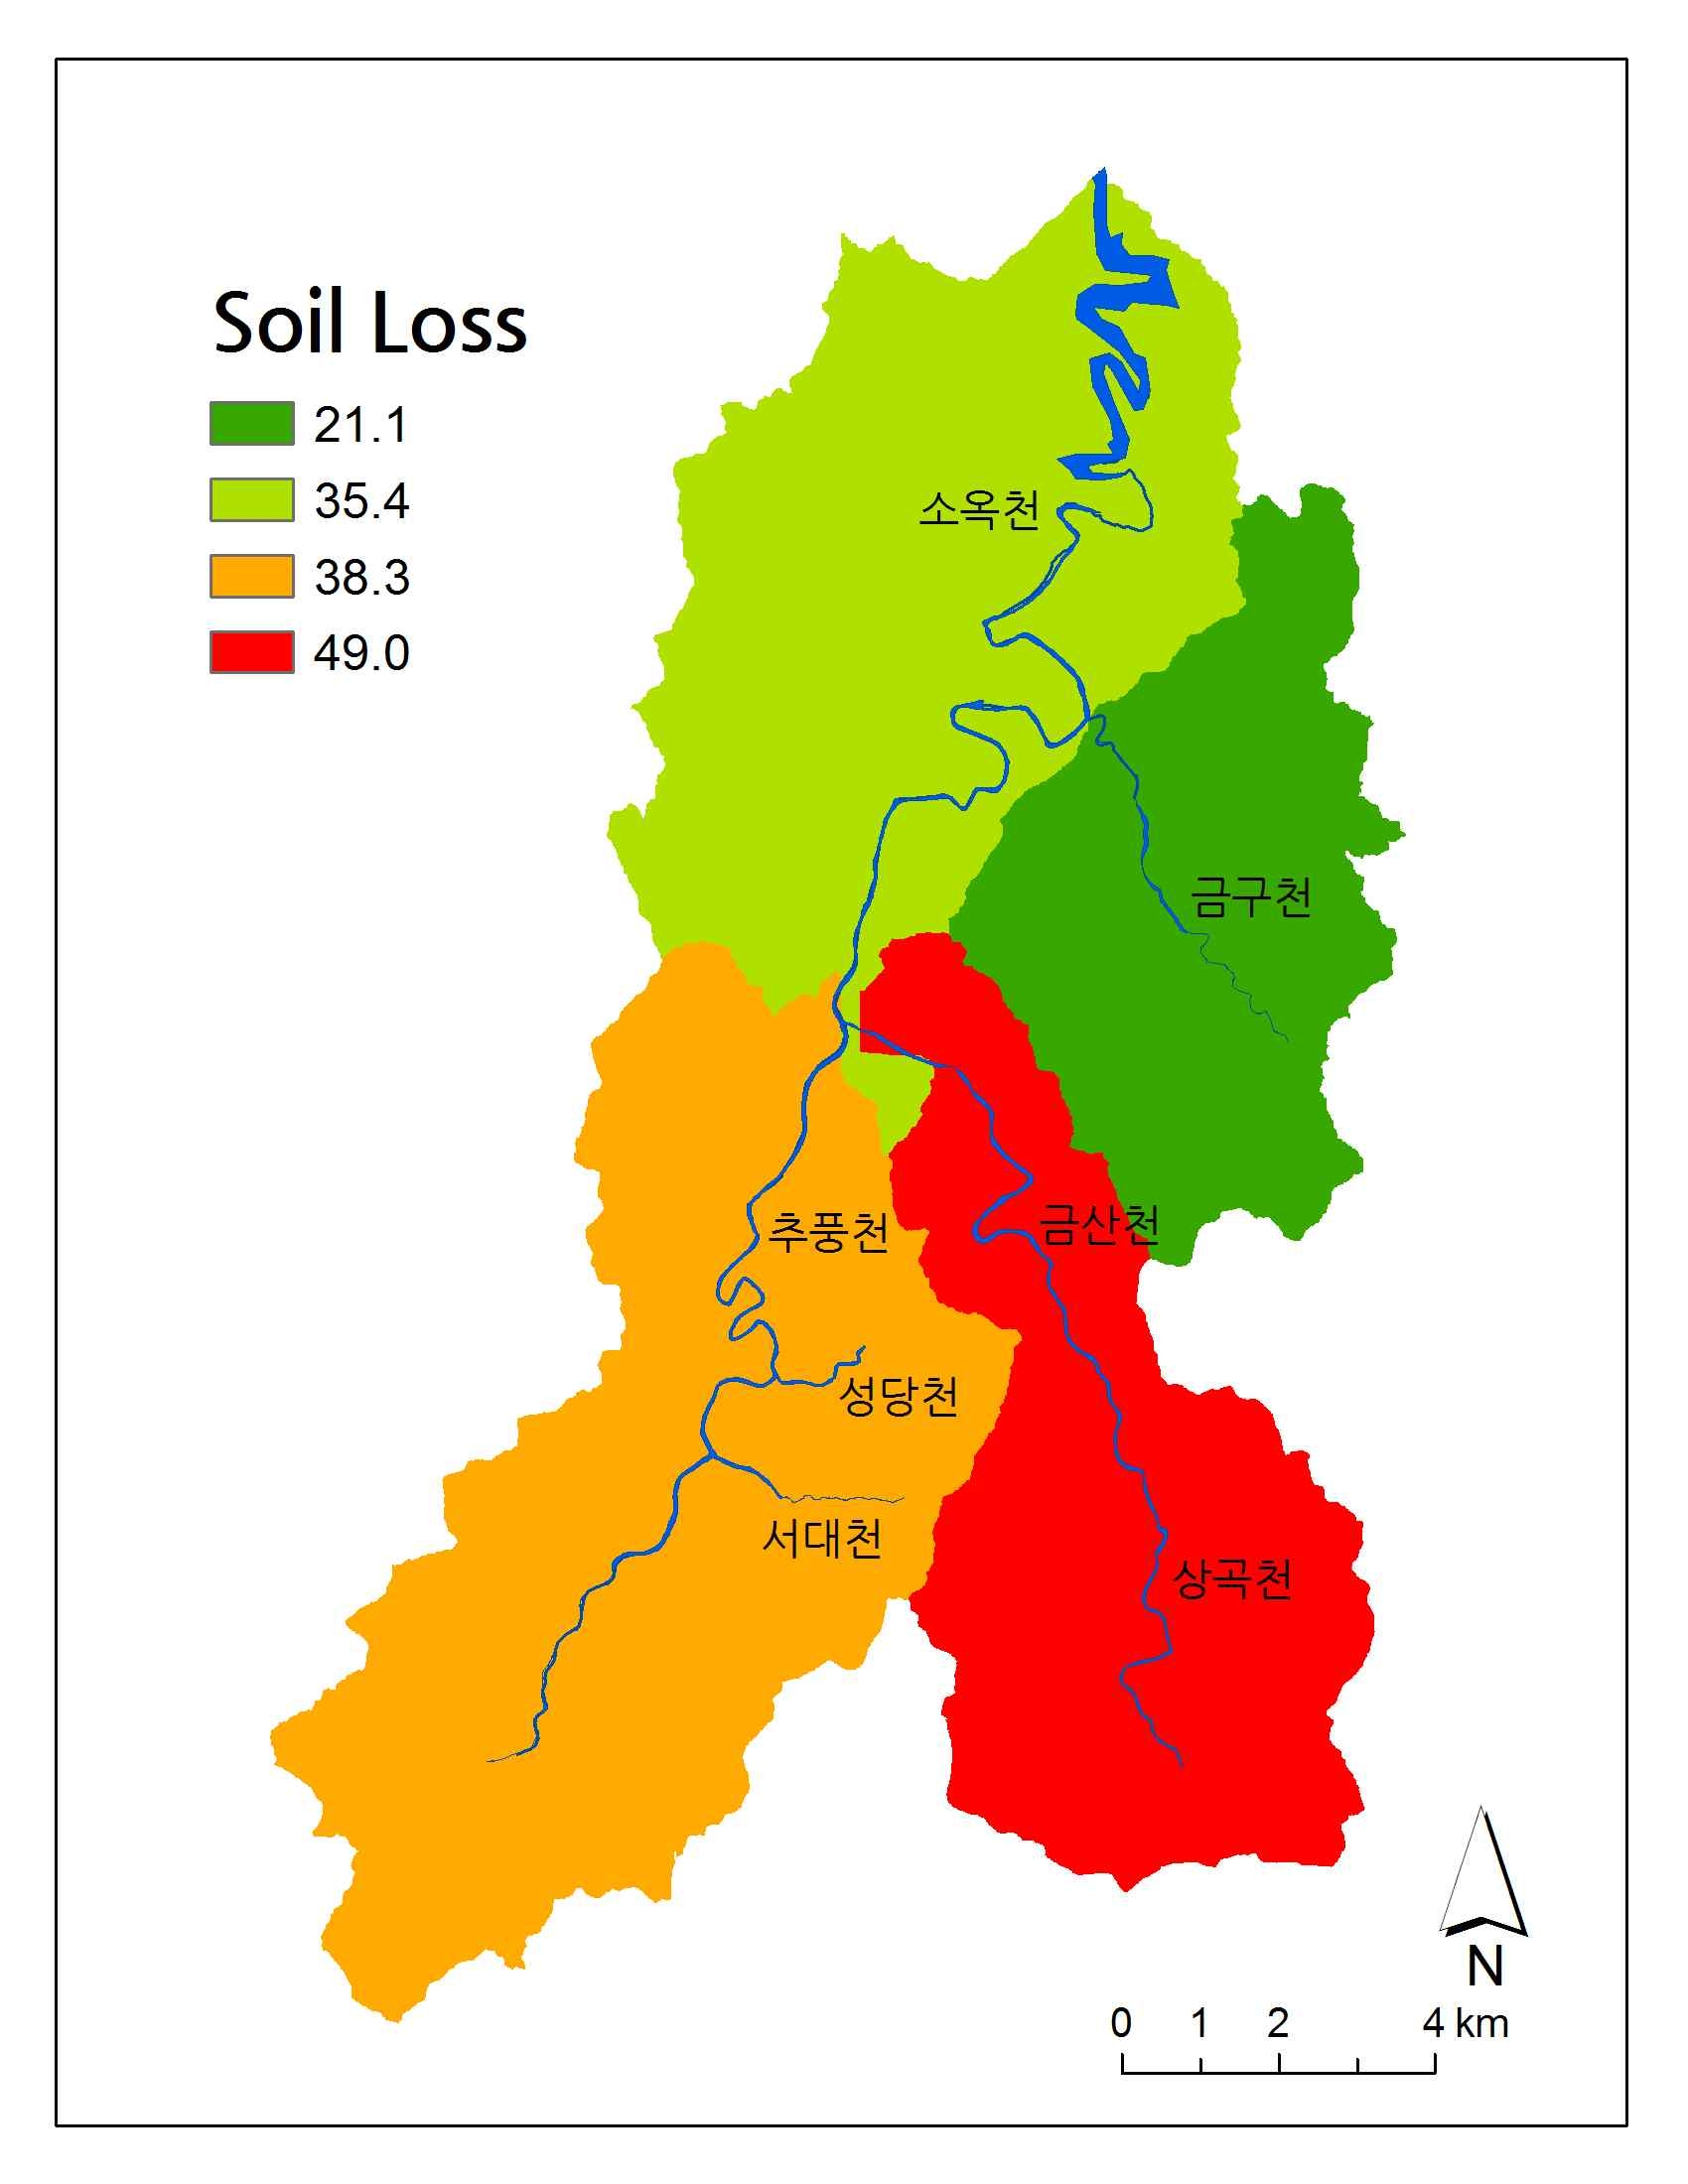 The amount of annual soil loss by unit watershed